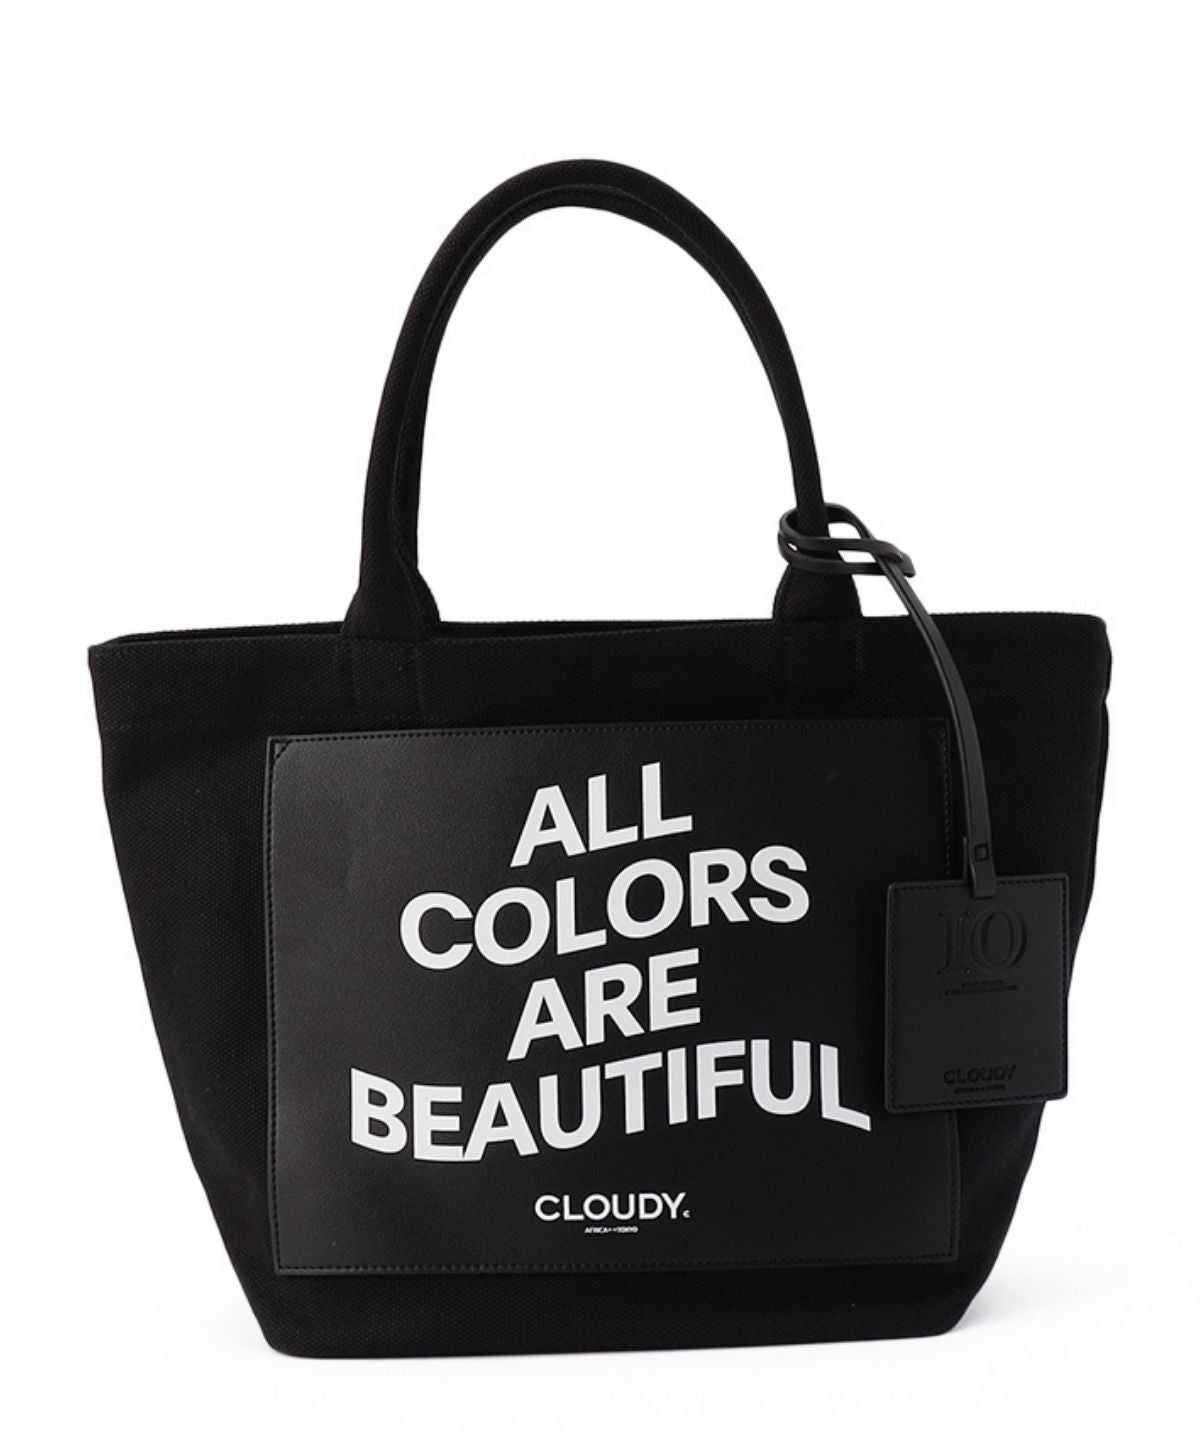 Bags｜Bags/Miscellaneous Goods｜CLOUDY Official Mail Order Site 